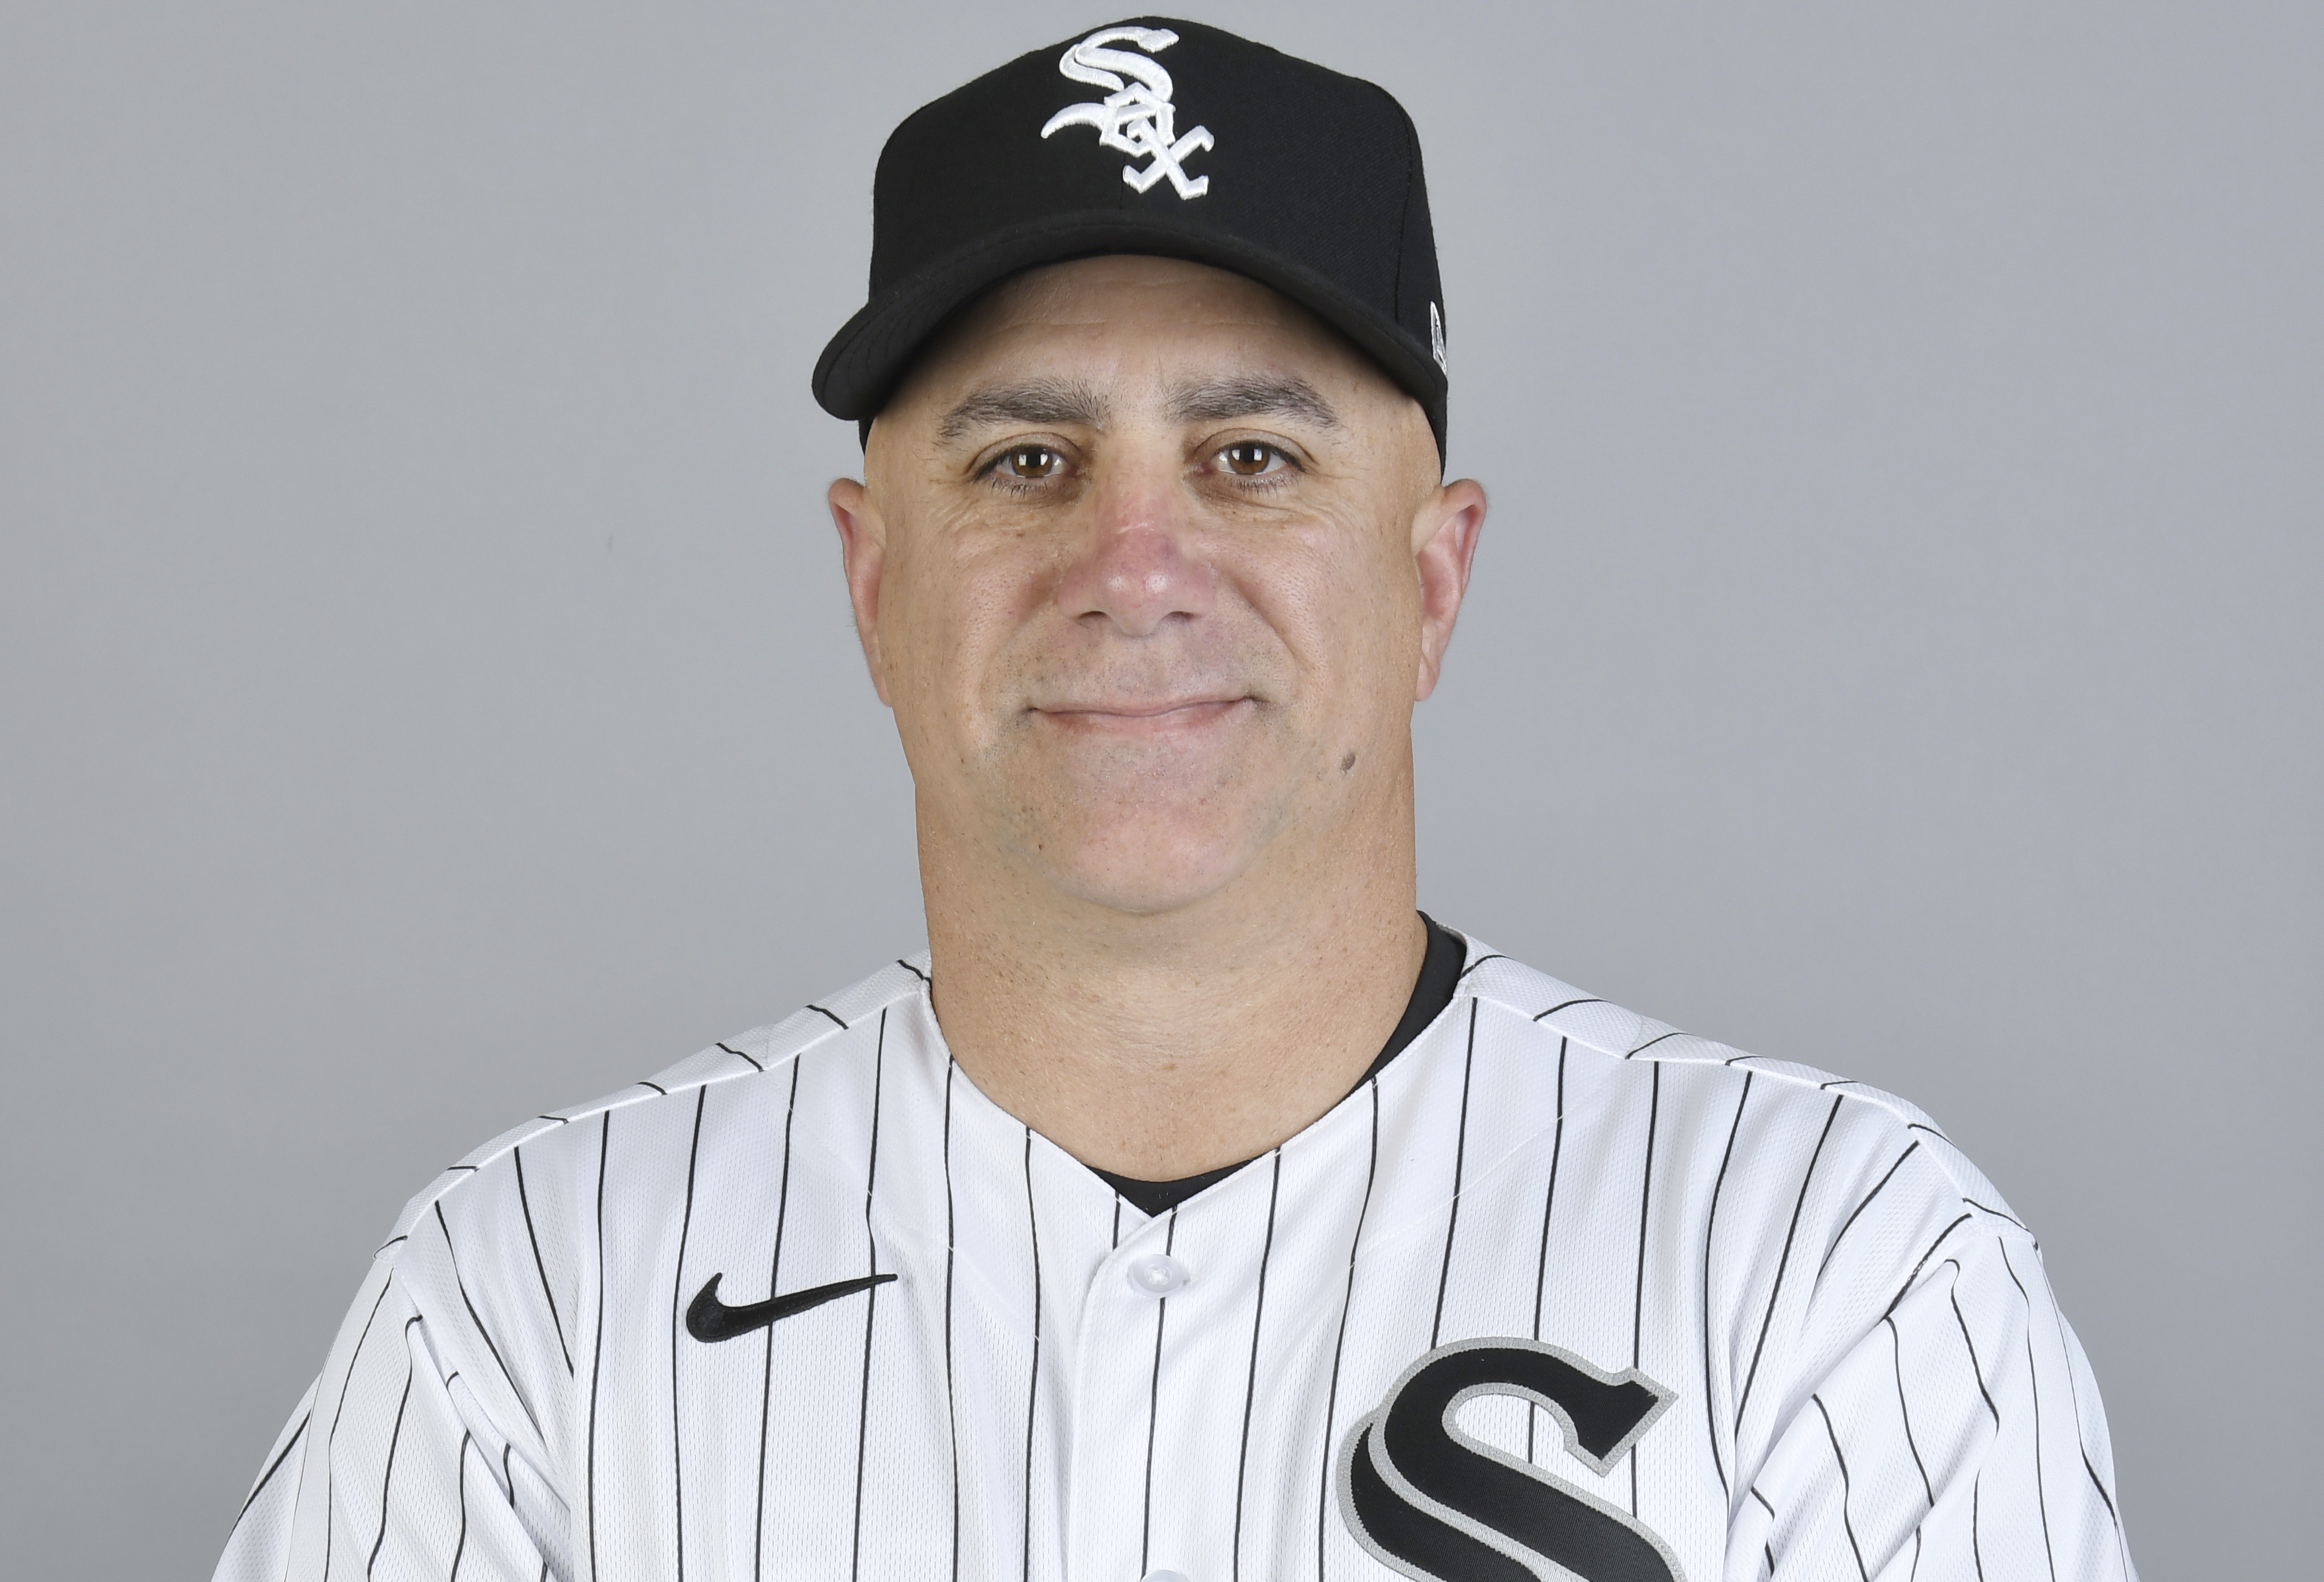 White Sox part ways with ex-Yankees coach under new manager Pedro Grifol 